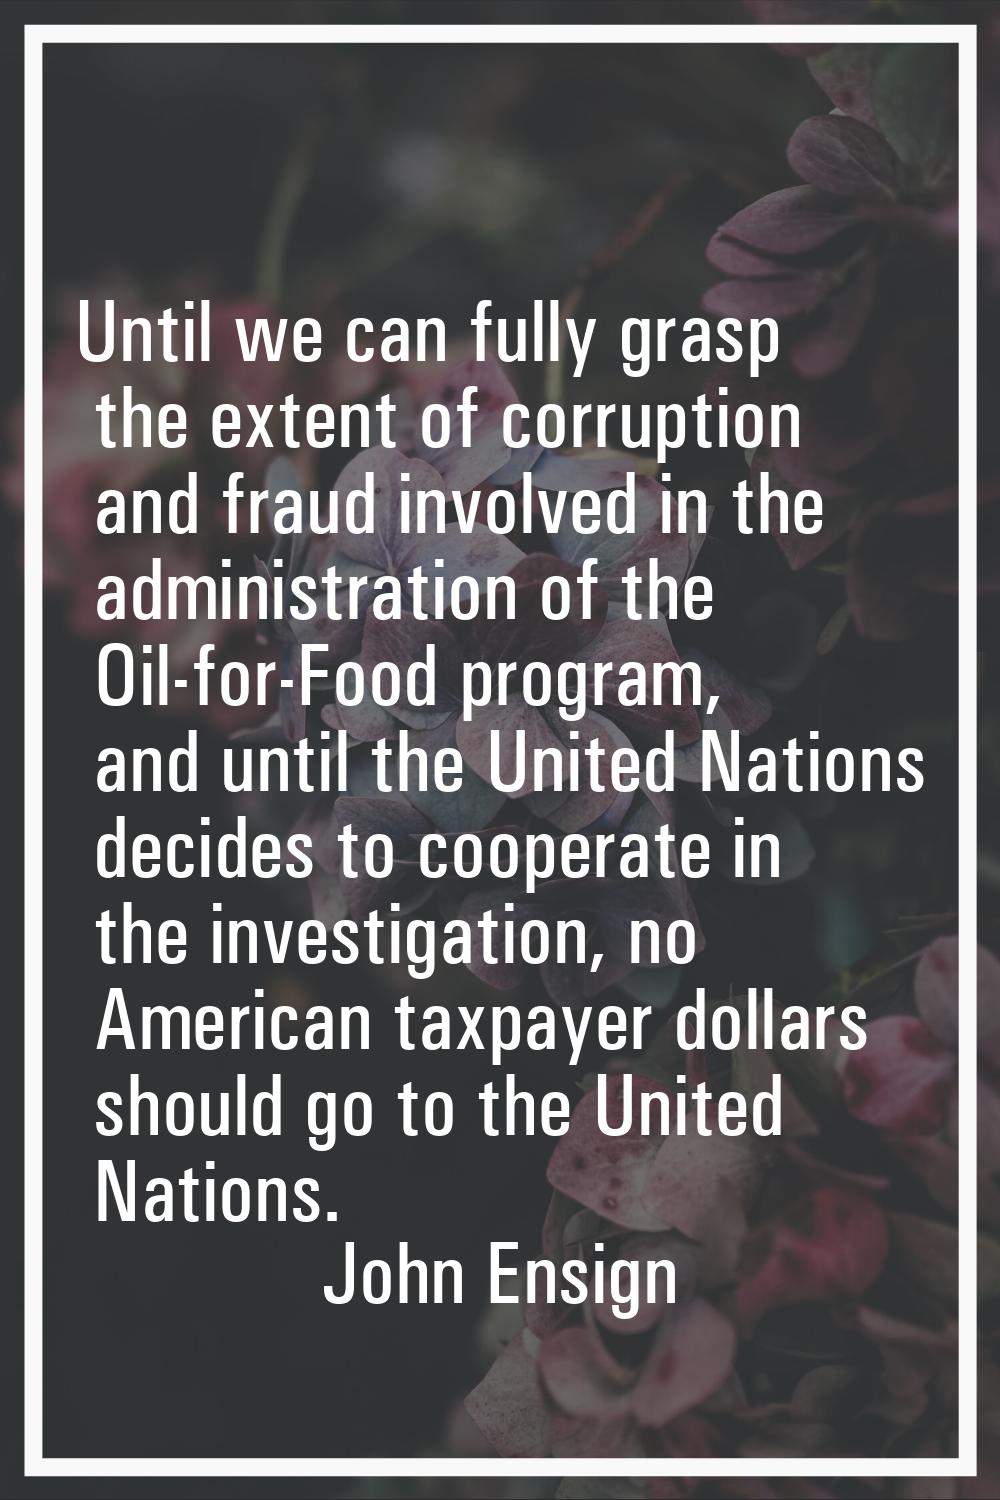 Until we can fully grasp the extent of corruption and fraud involved in the administration of the O